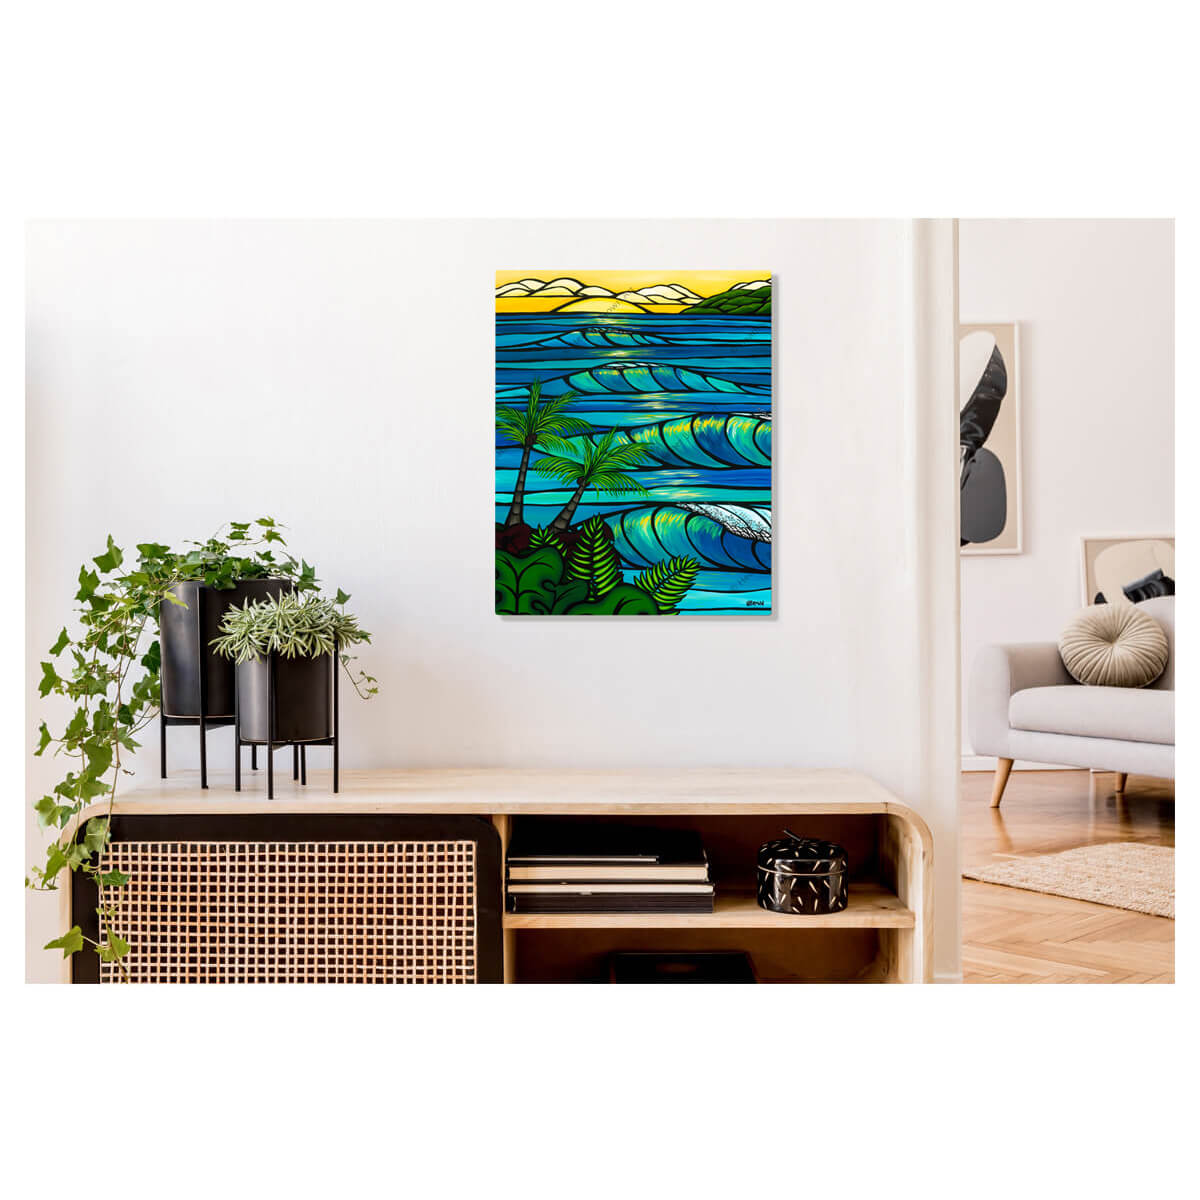 A metal art print featuring crashing waves and a classic Hawaiian sunset by Hawaii surf artist Heather Brown